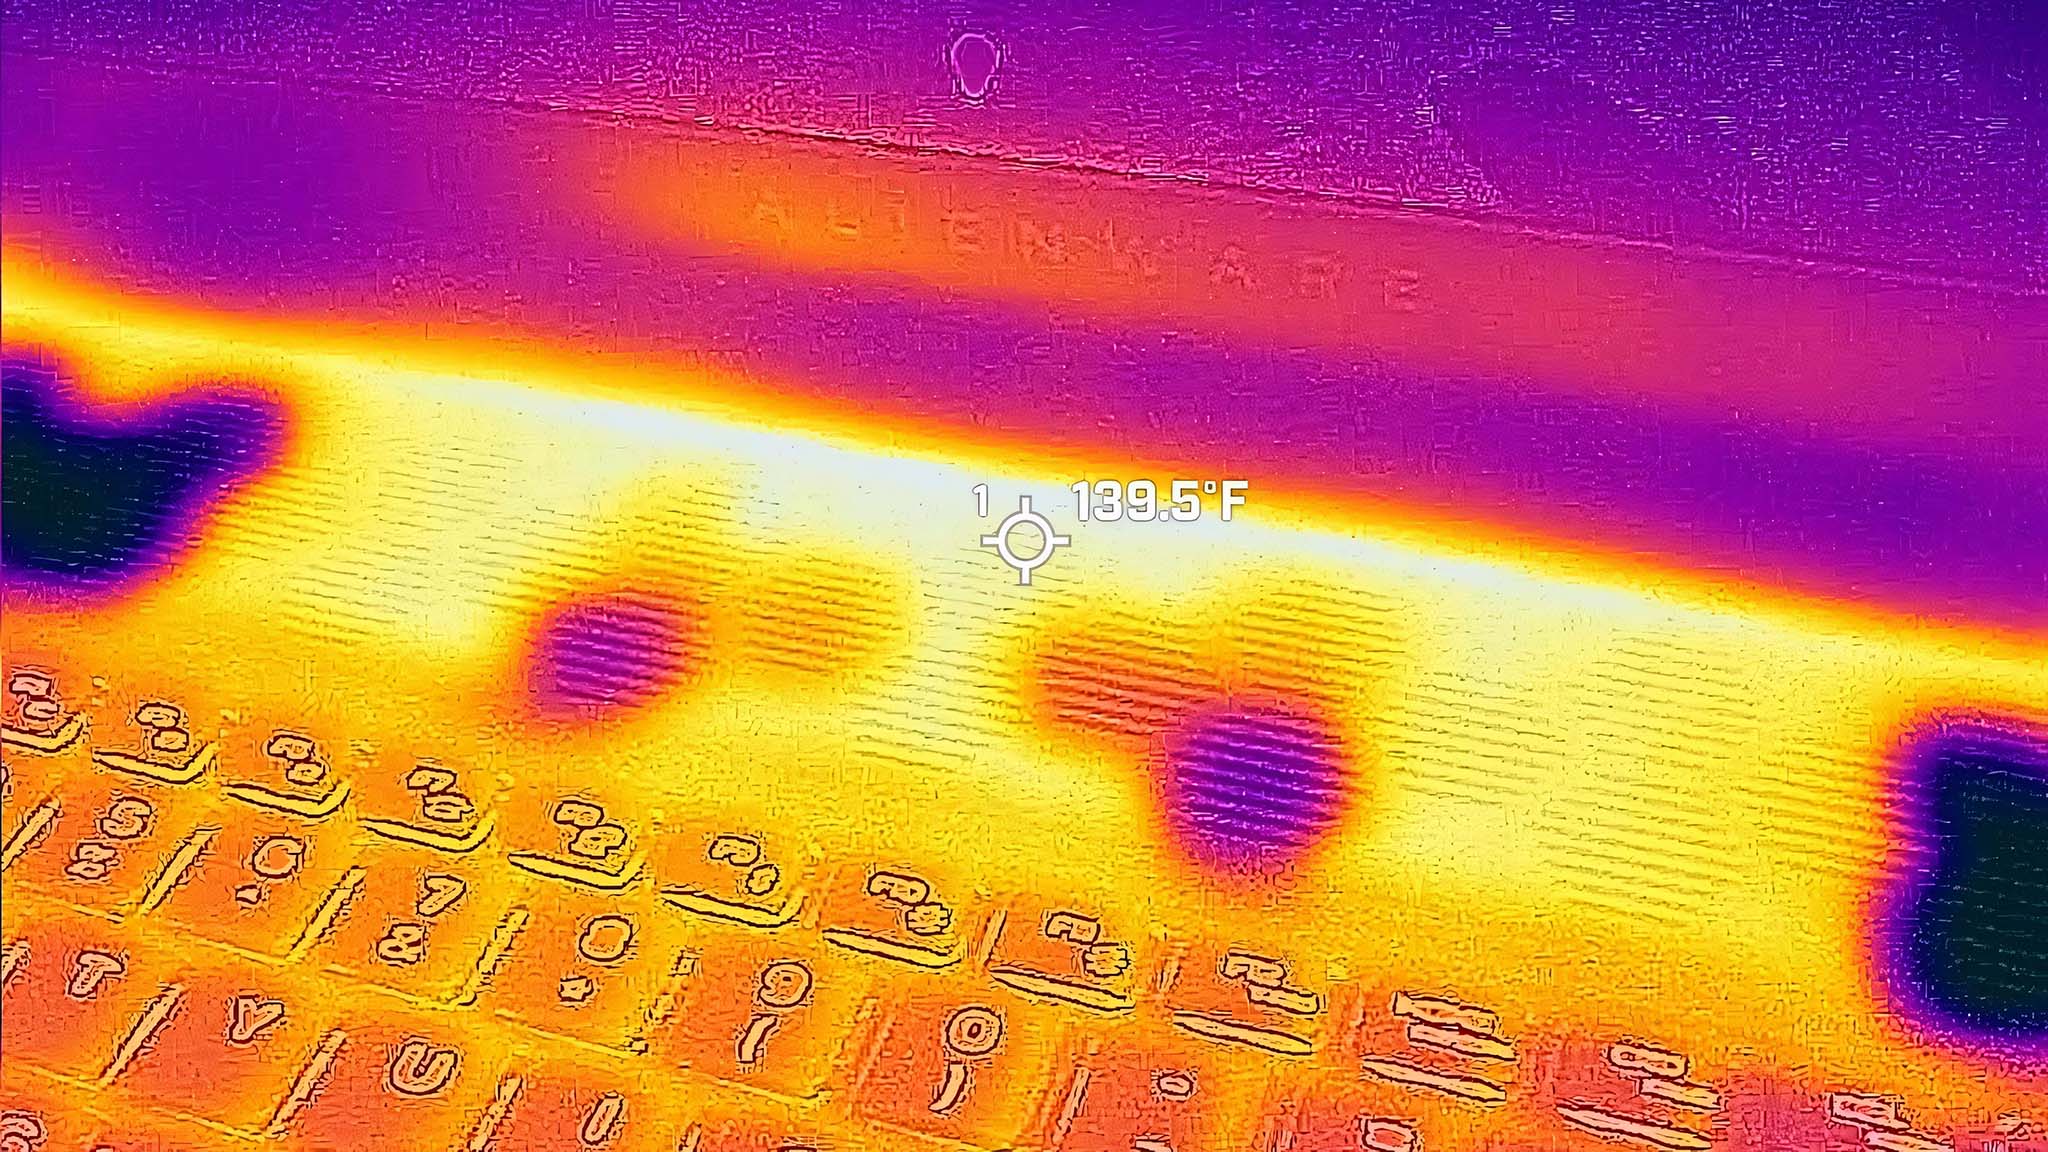 Alienware M18 R2 thermals above keyboard.